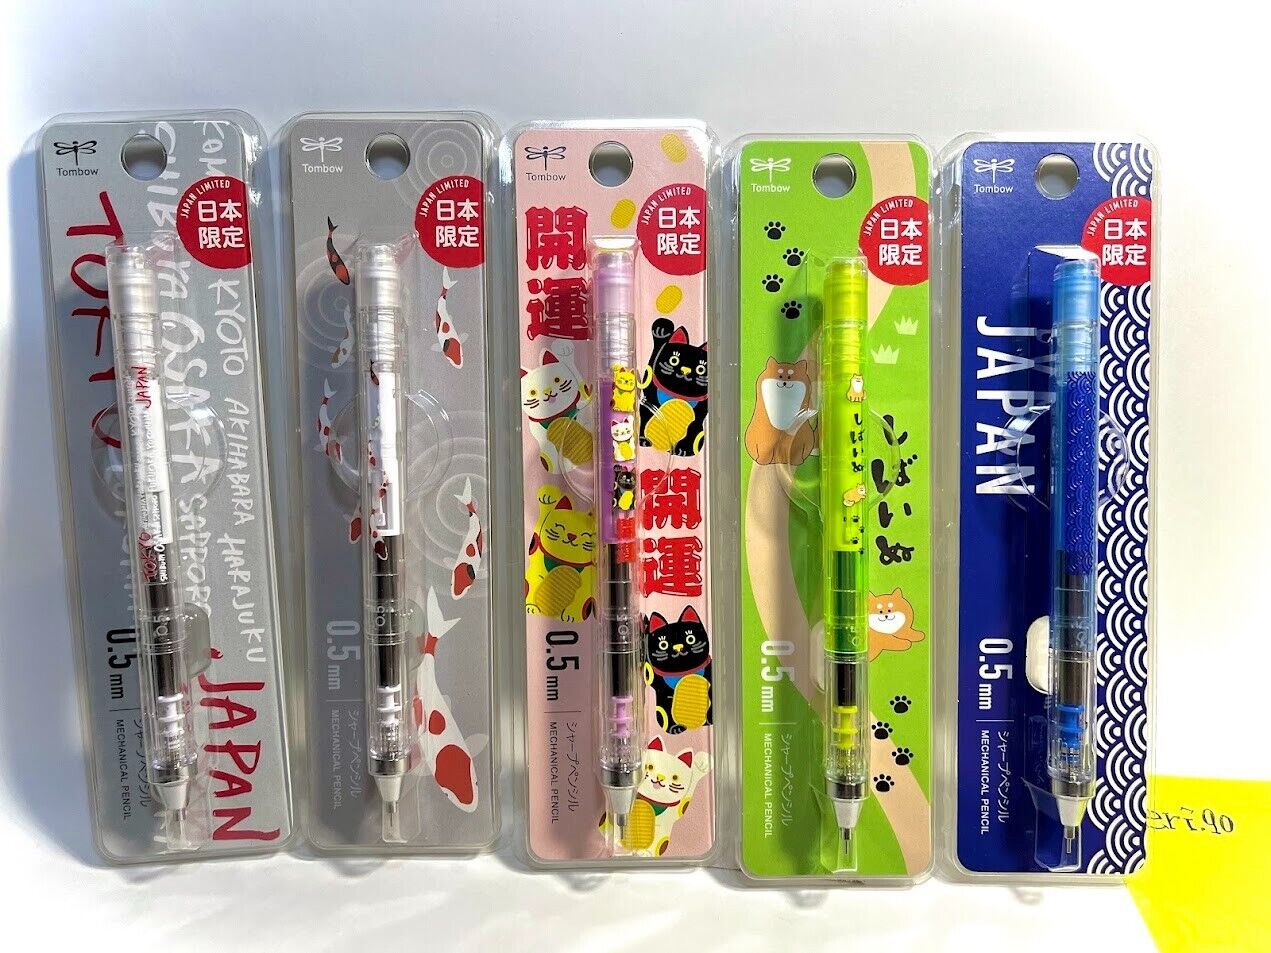 Tombow Mechanical Pencil 0.5mm Japan Limited Edition 5 PCS